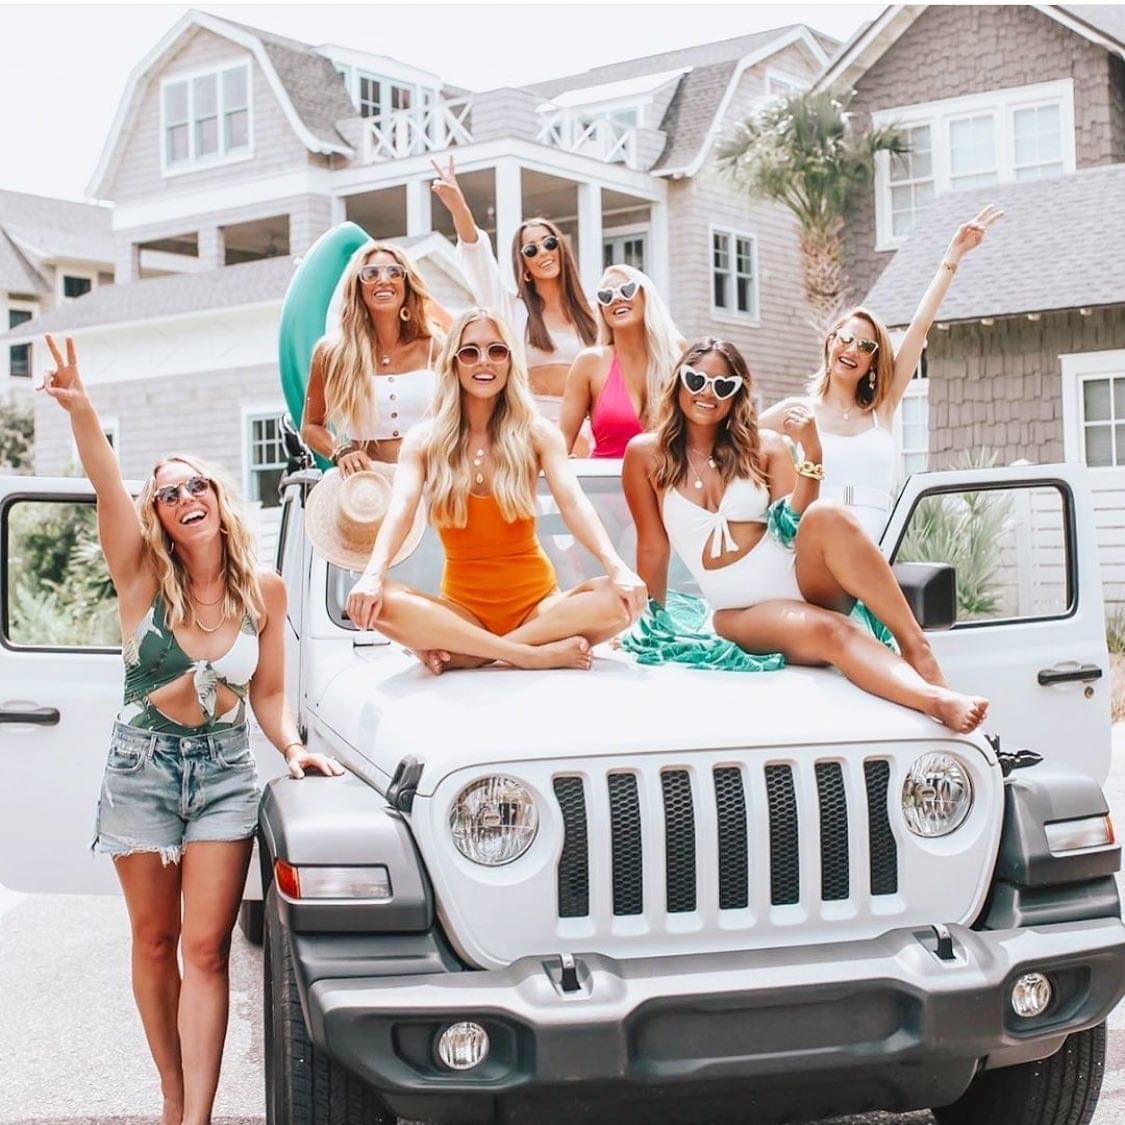 Rent a jeep in destin for your bachelorette party and cruise through destin, 30A, Seaside, and miramar beach, FL